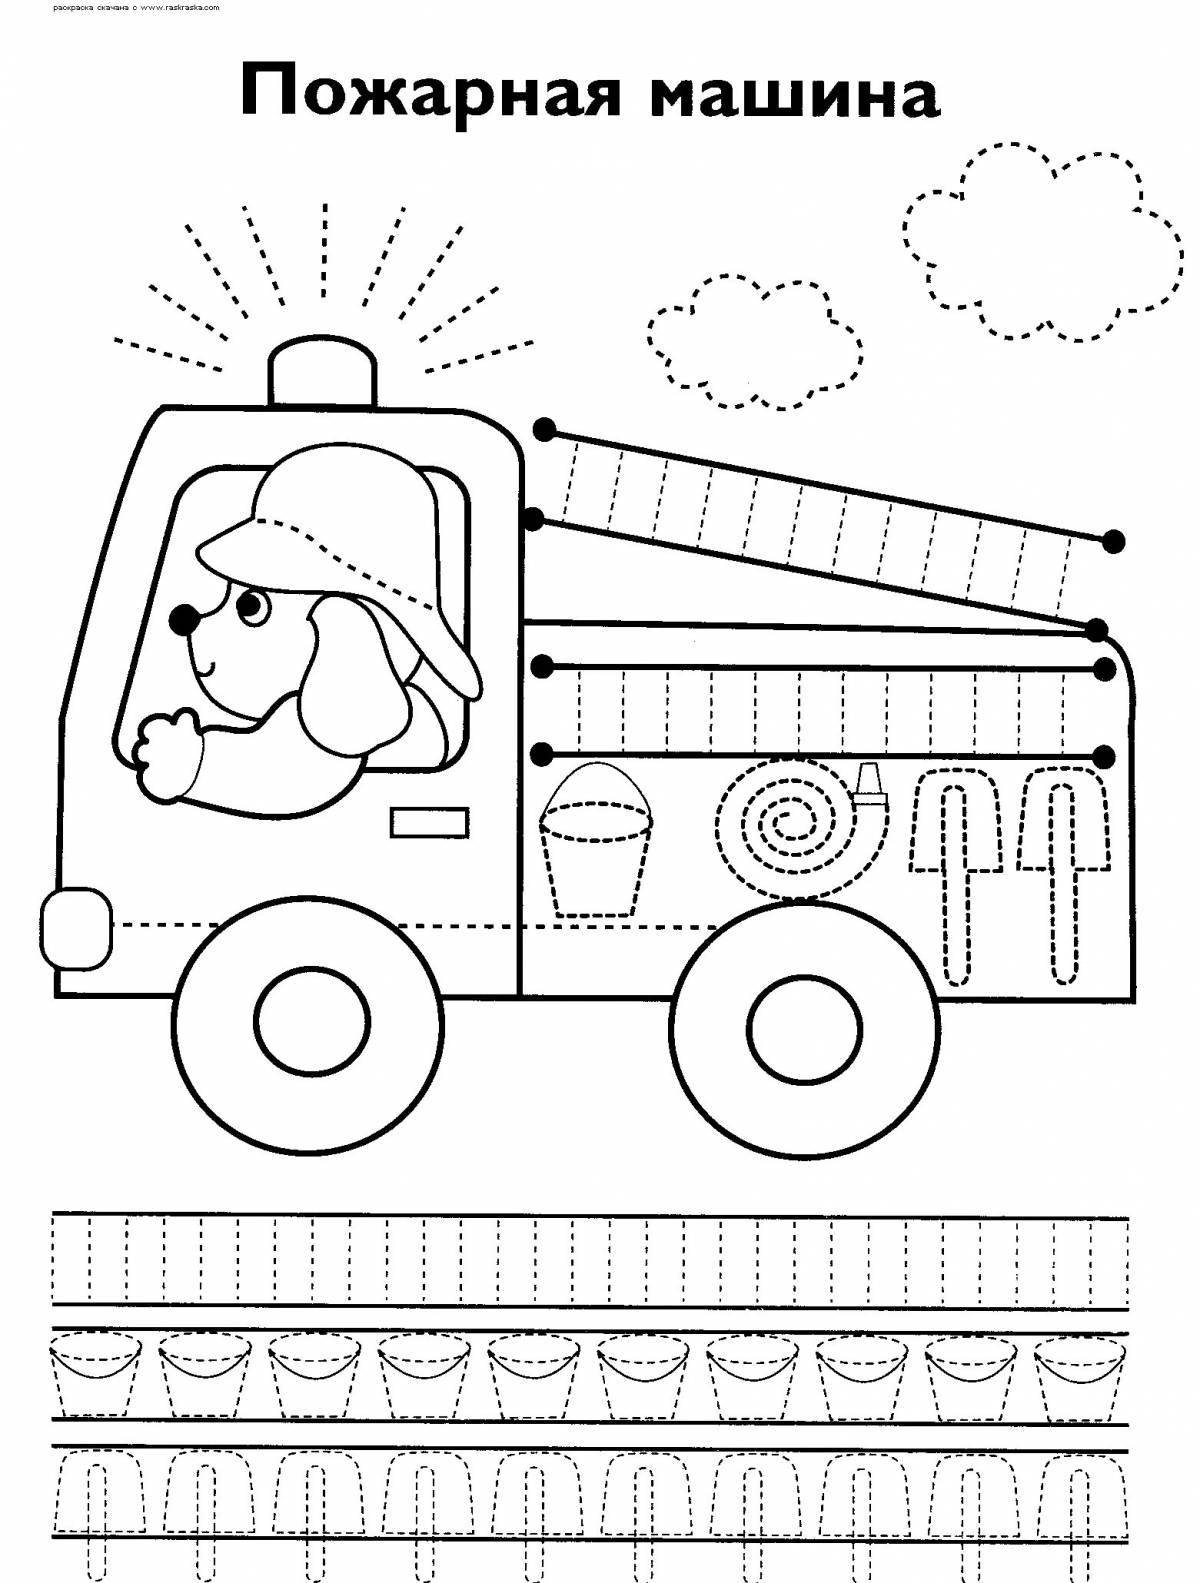 Coloring book for boys 5 years old